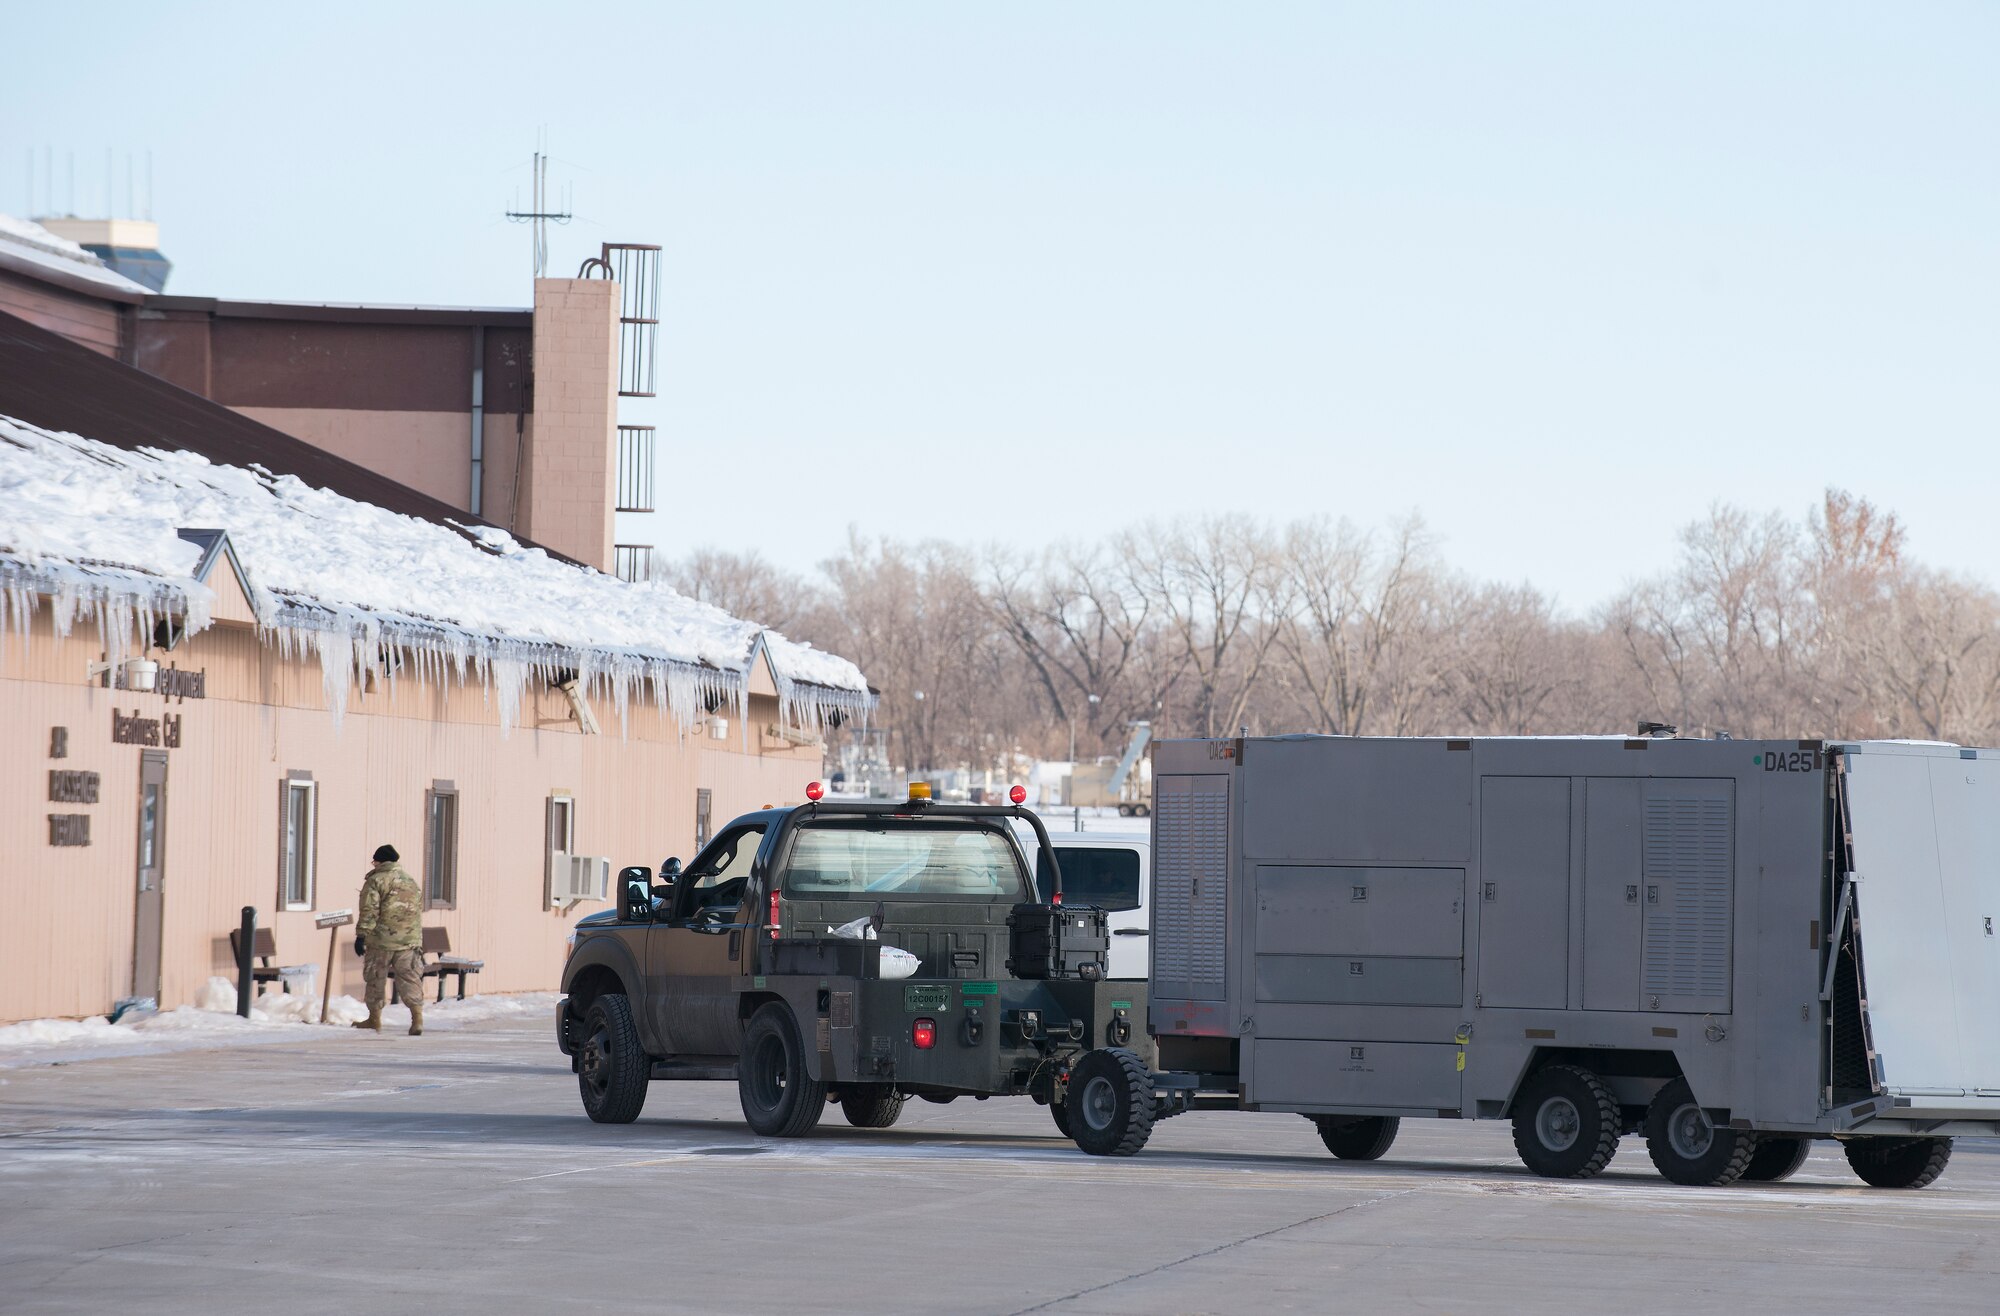 Offutt Airmen move cargo inside the Installation Deployment Readiness Cell yard at Offutt Air Force Base, Nebraska Jan. 29, 2019, while participating in Phase I of Operational Readiness Exercise Winter Havoc. The exercise tested Offutt’s ability to process and deploy a large amount of personnel and equipment on short notice. (U.S. Air Force photo by Delanie Stafford)